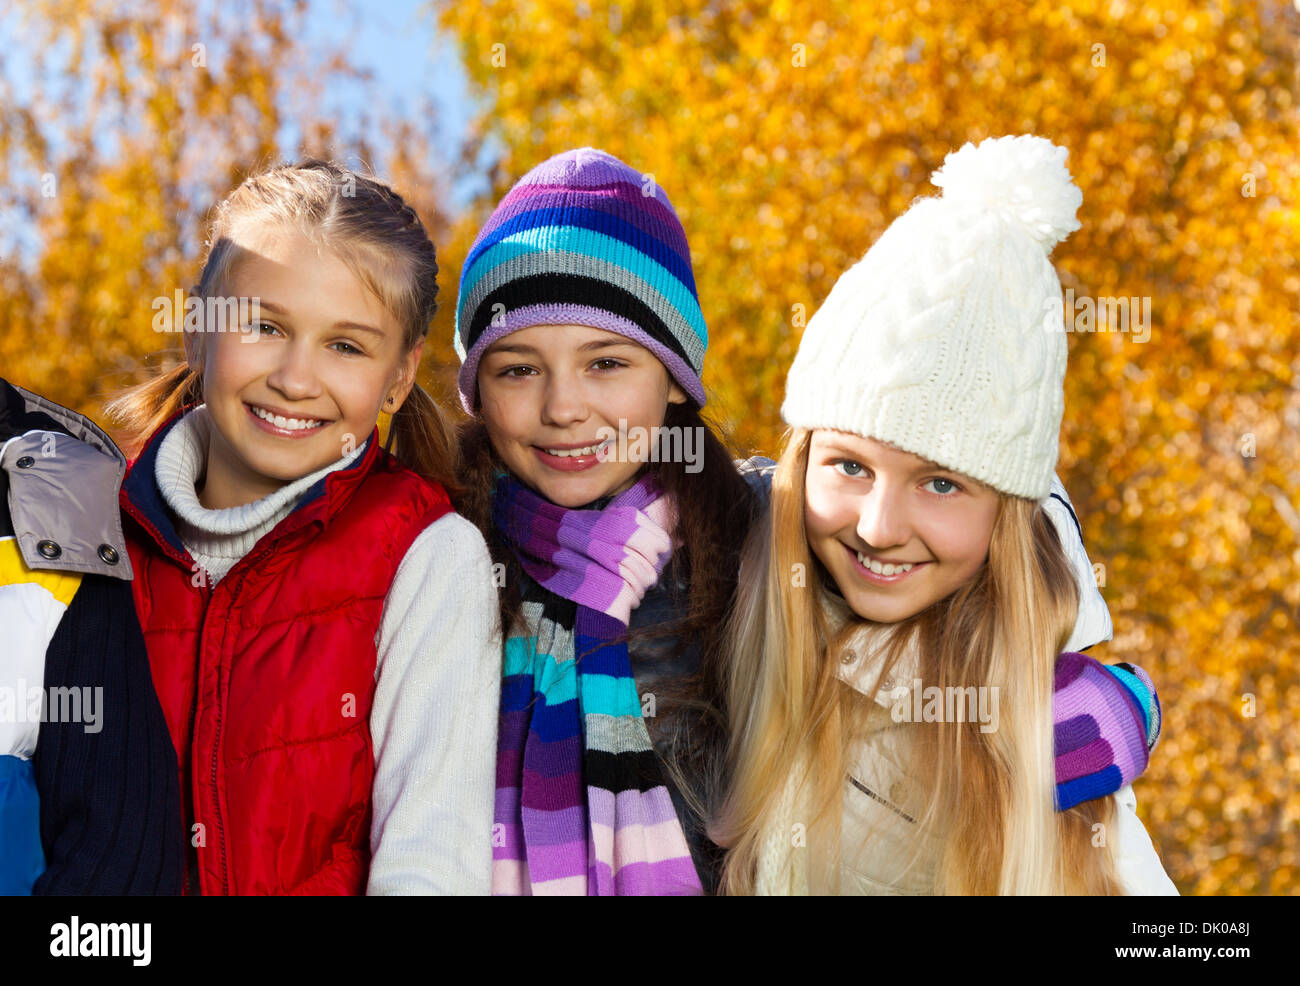 Close portrait of three happy kid, girls girls in autumn clothes on sunny day with happy smiling faces wearing warm clothes Stock Photo